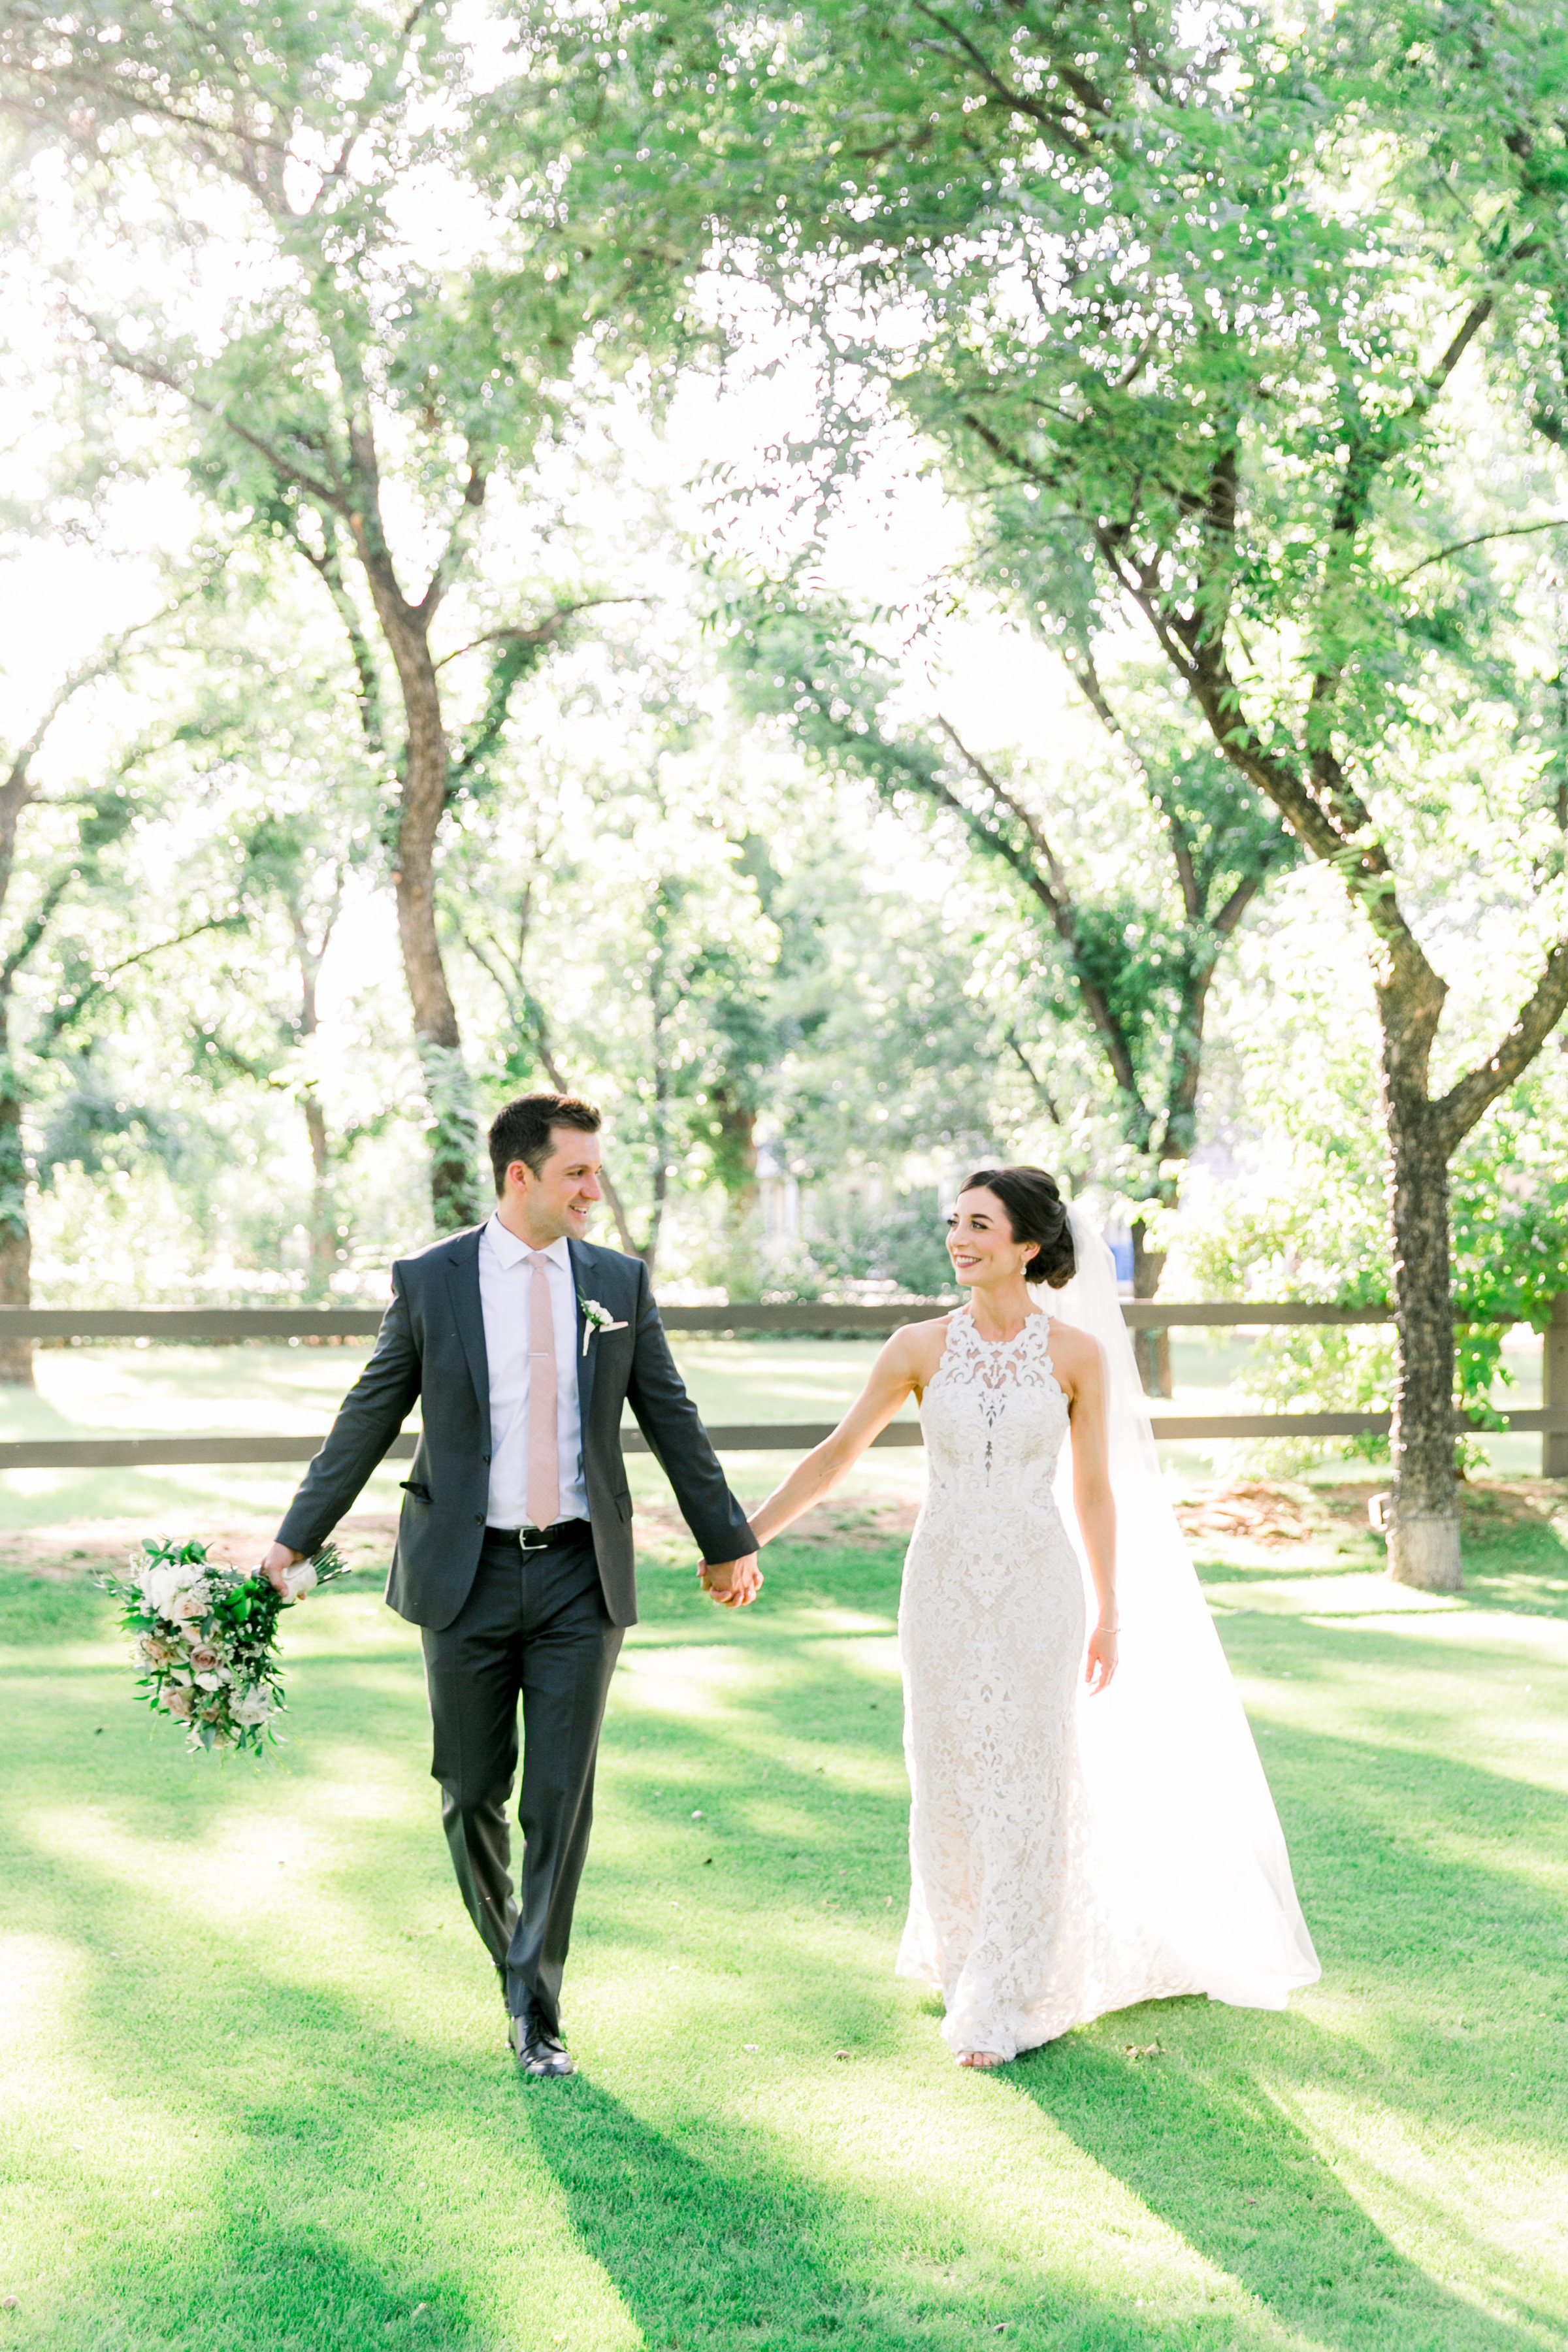 Karlie Colleen Photography - Venue At The Grove - Arizona Wedding - Maggie & Grant -62